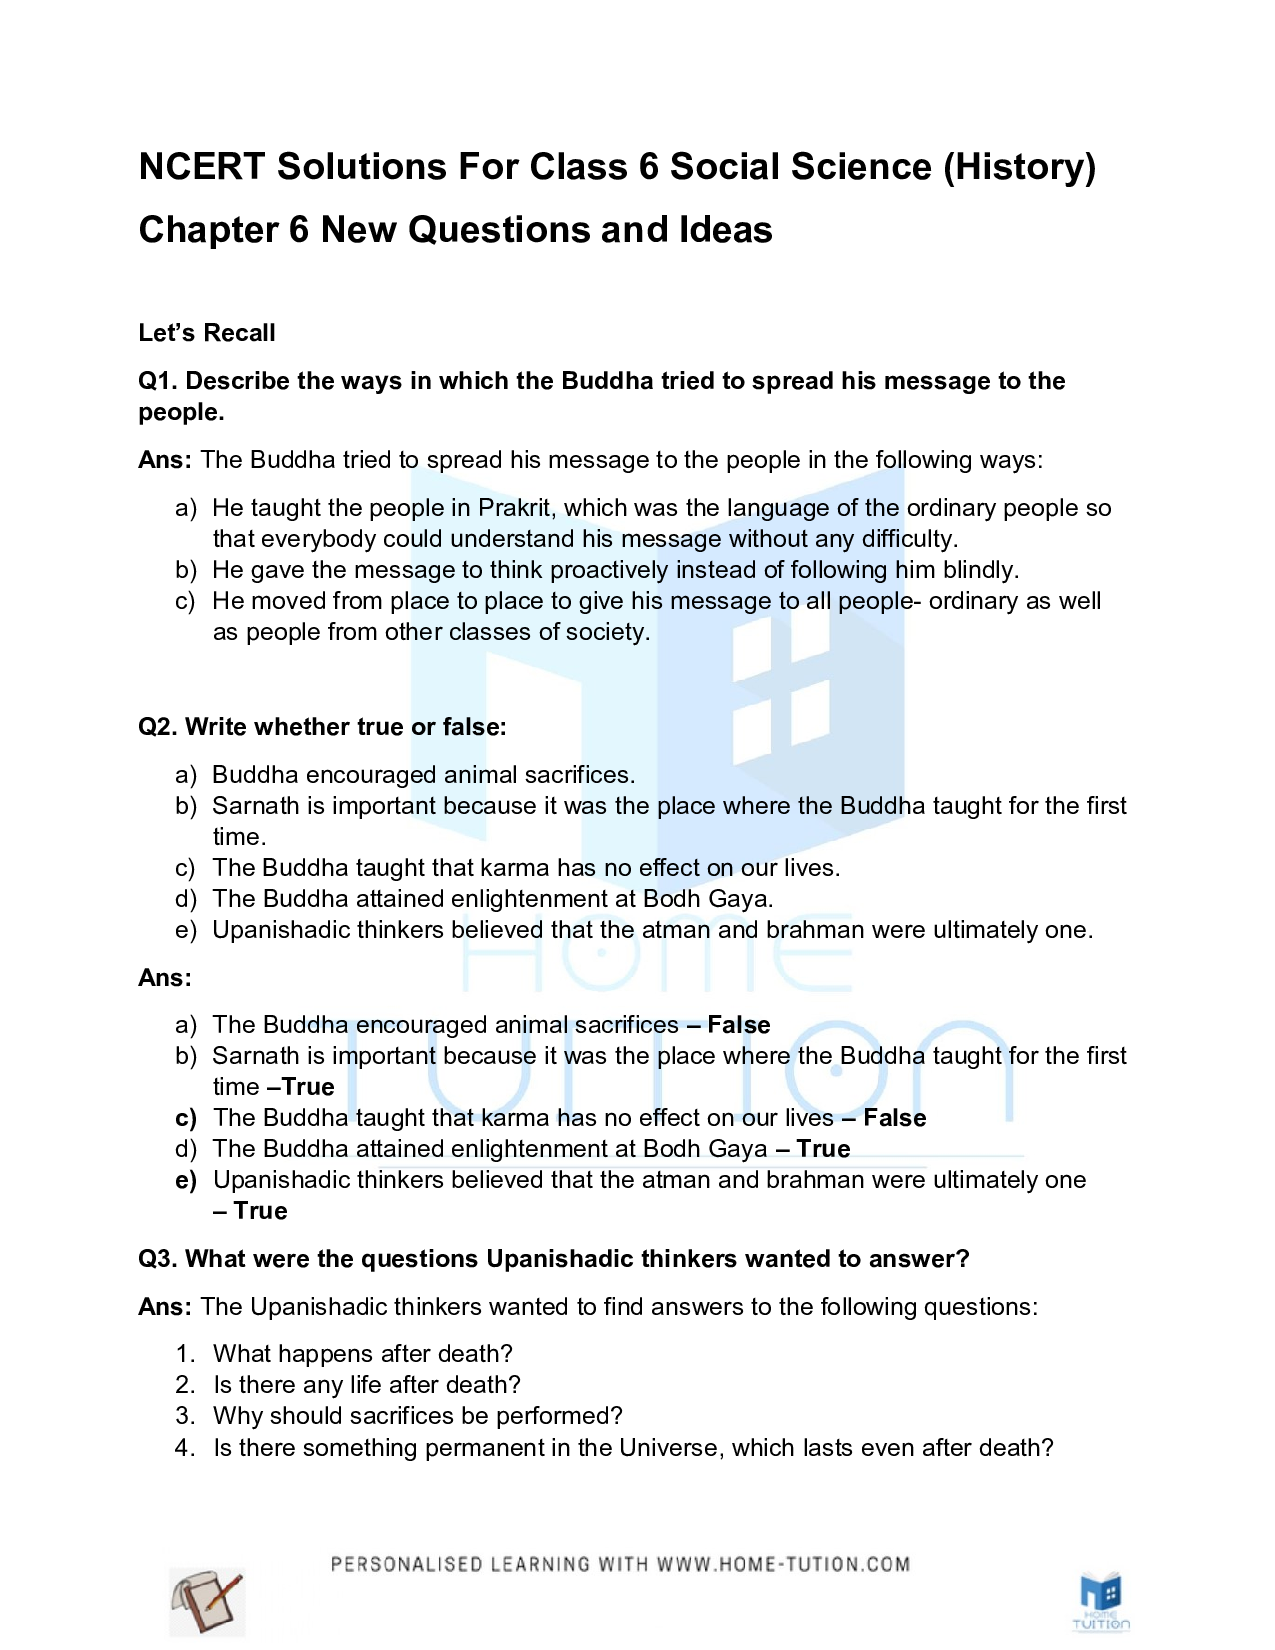 Chapter 6 New Questions and Ideas